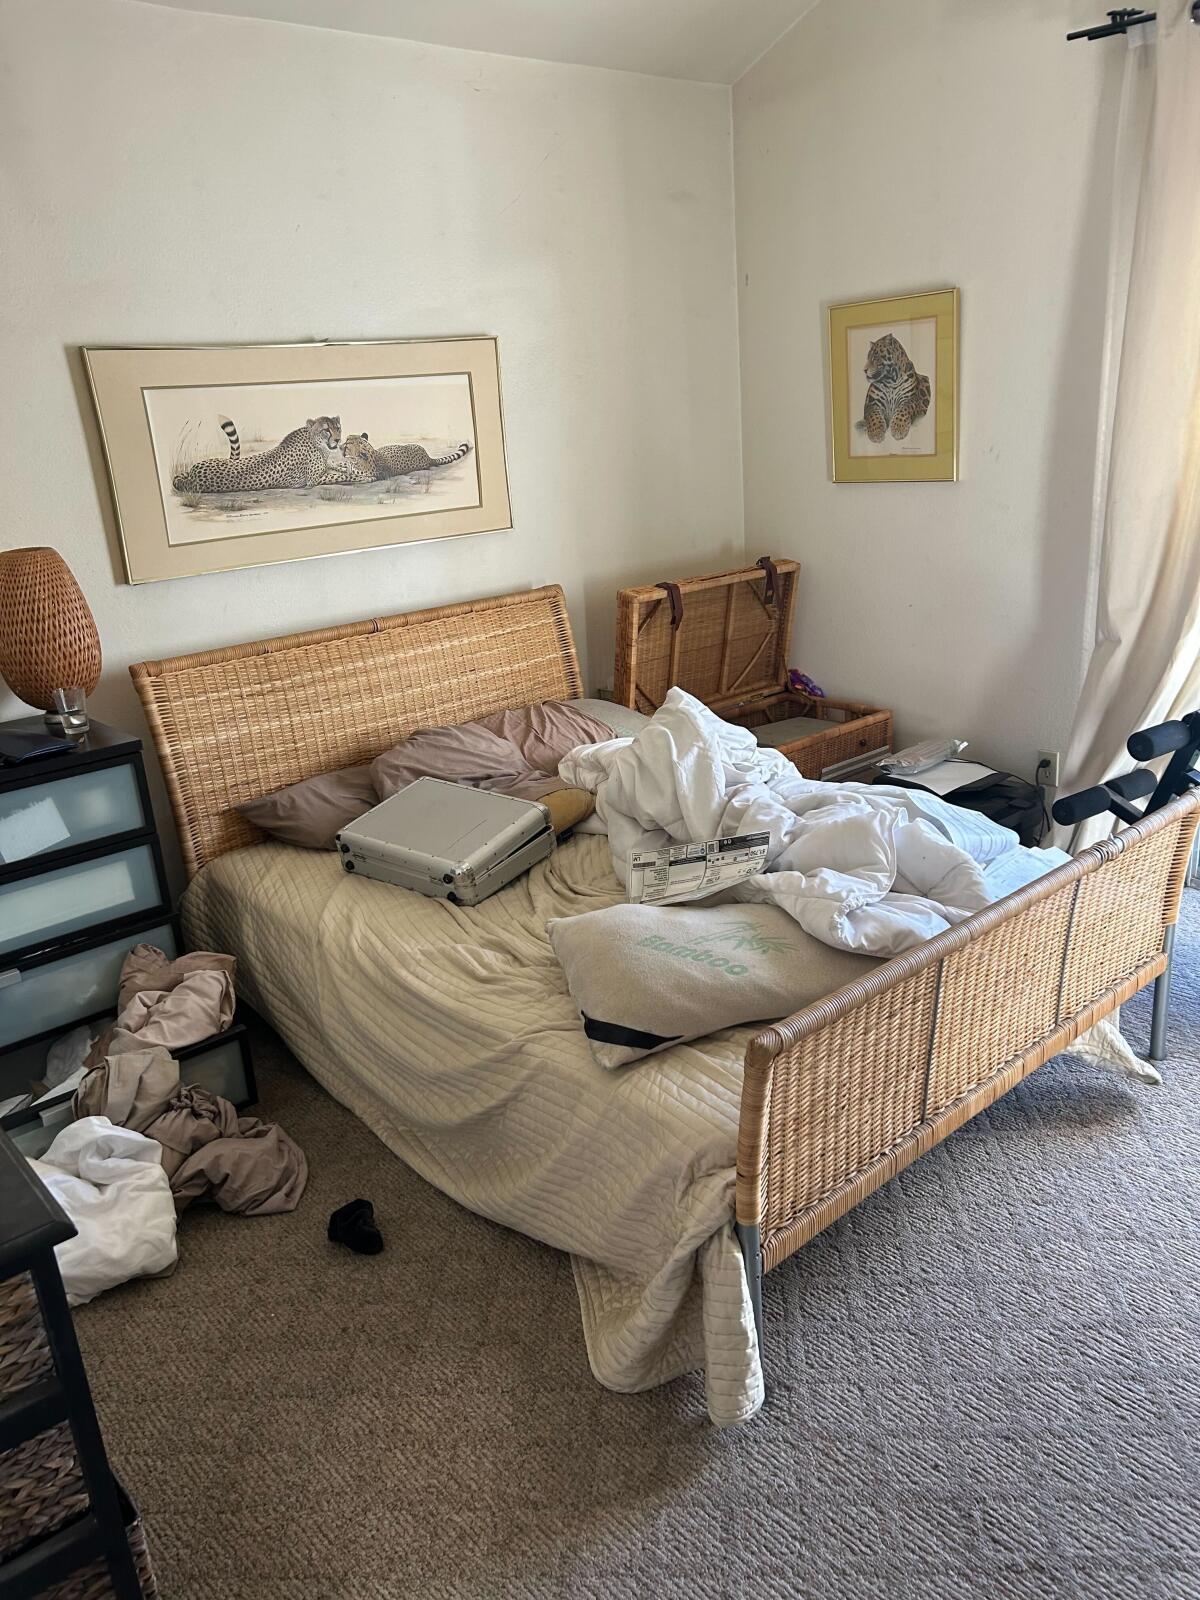 A bedroom following an LAPD search.